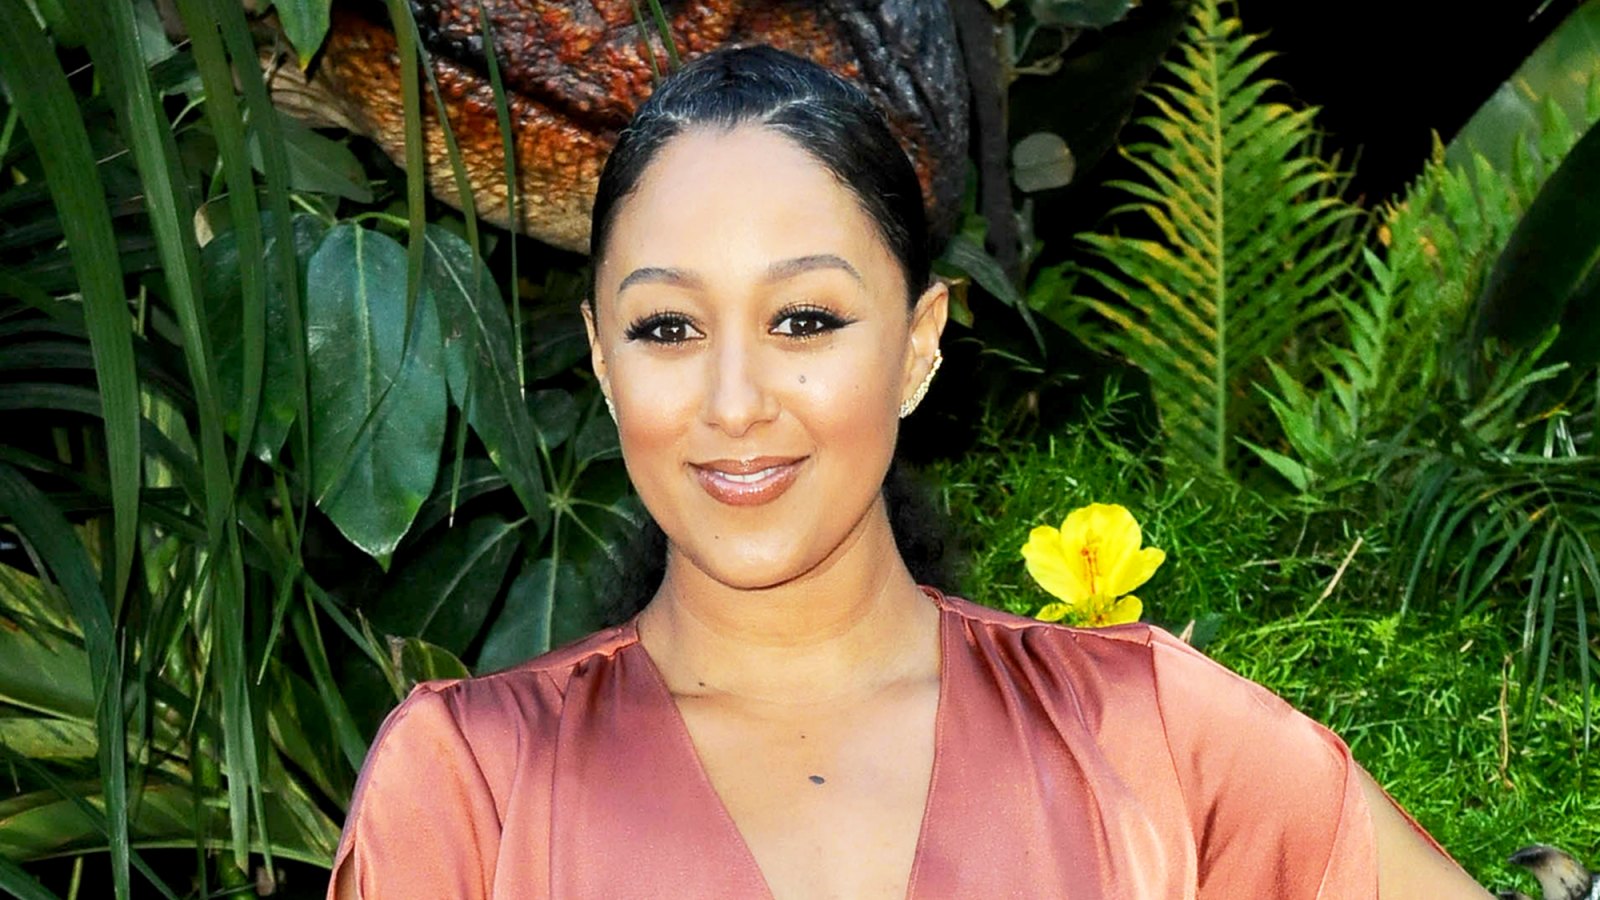 Tamara Mowry attends the premiere of Universal Pictures and Amblin Entertainment's 'Jurassic World: Fallen Kingdom' on June 12, 2018 in Los Angeles, California.